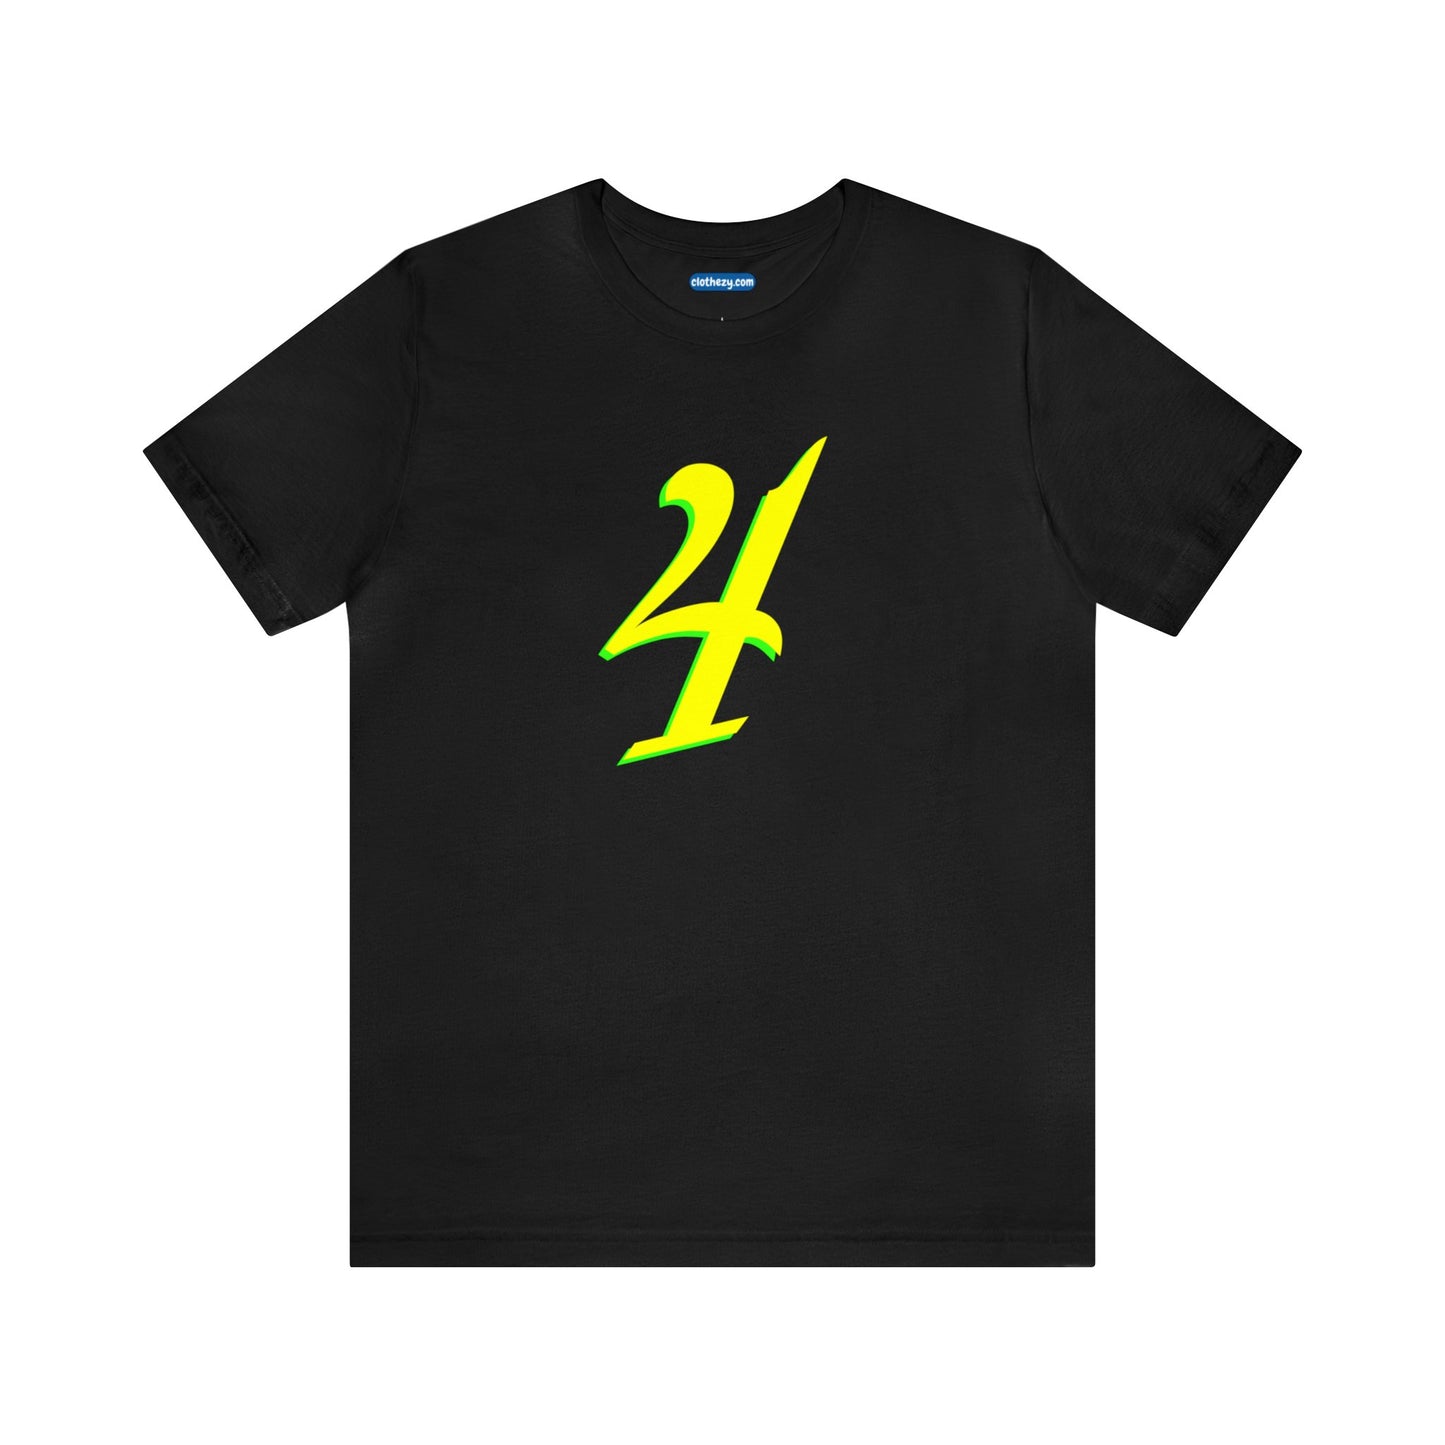 Number 4 Design - Soft Cotton Tee for birthdays and celebrations, Gift for friends and family, Multiple Options by clothezy.com in Asphalt Size Small - Buy Now